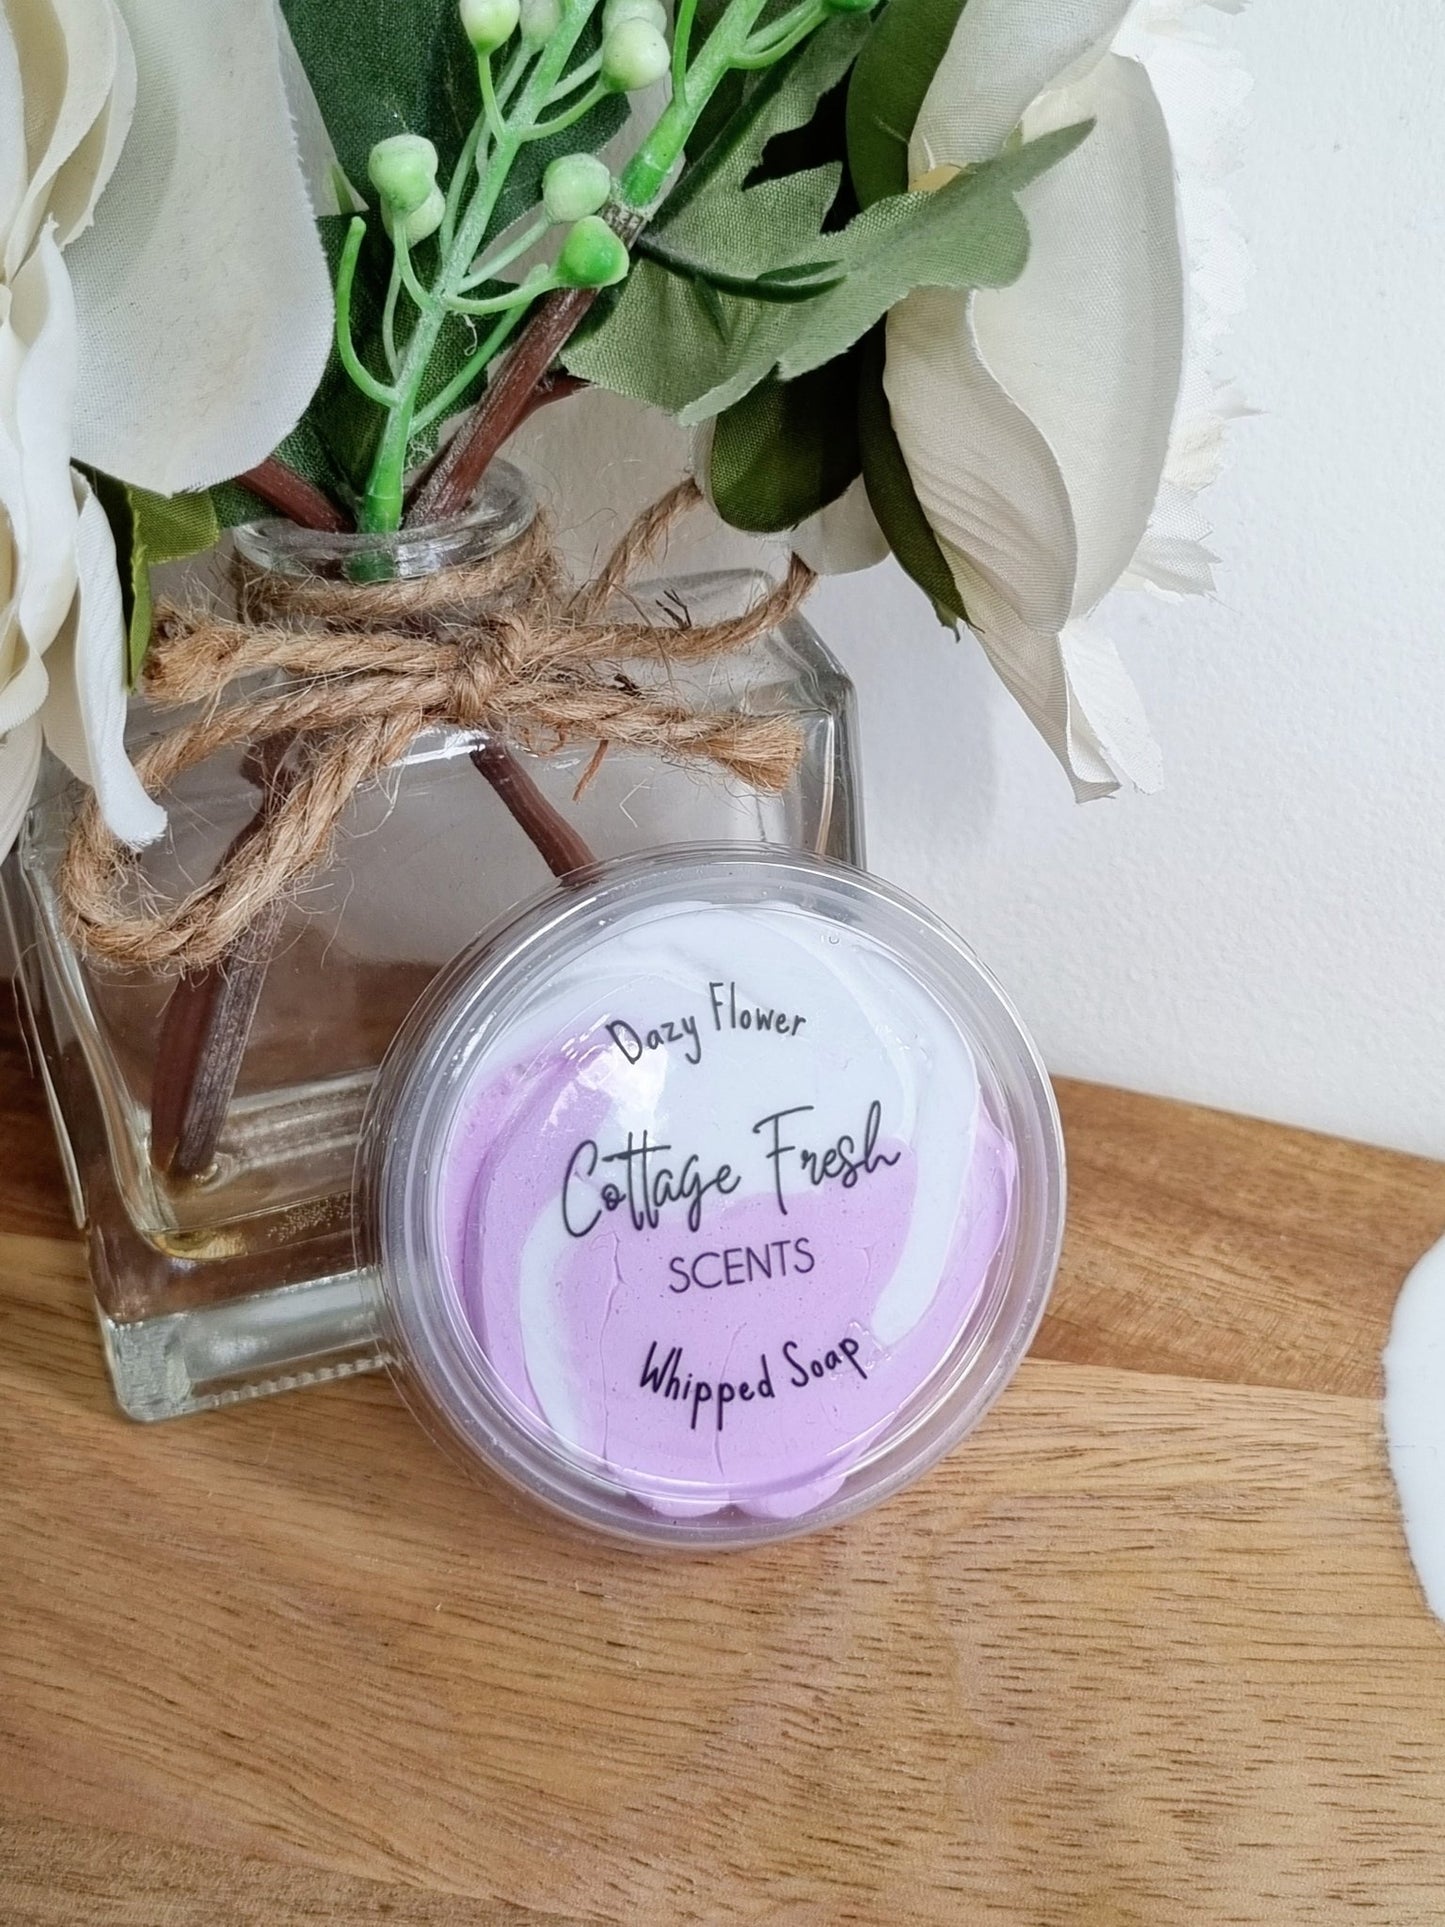 Dazy Flower Whipped Soap - Whipped Soap - Cottage Fresh Scents